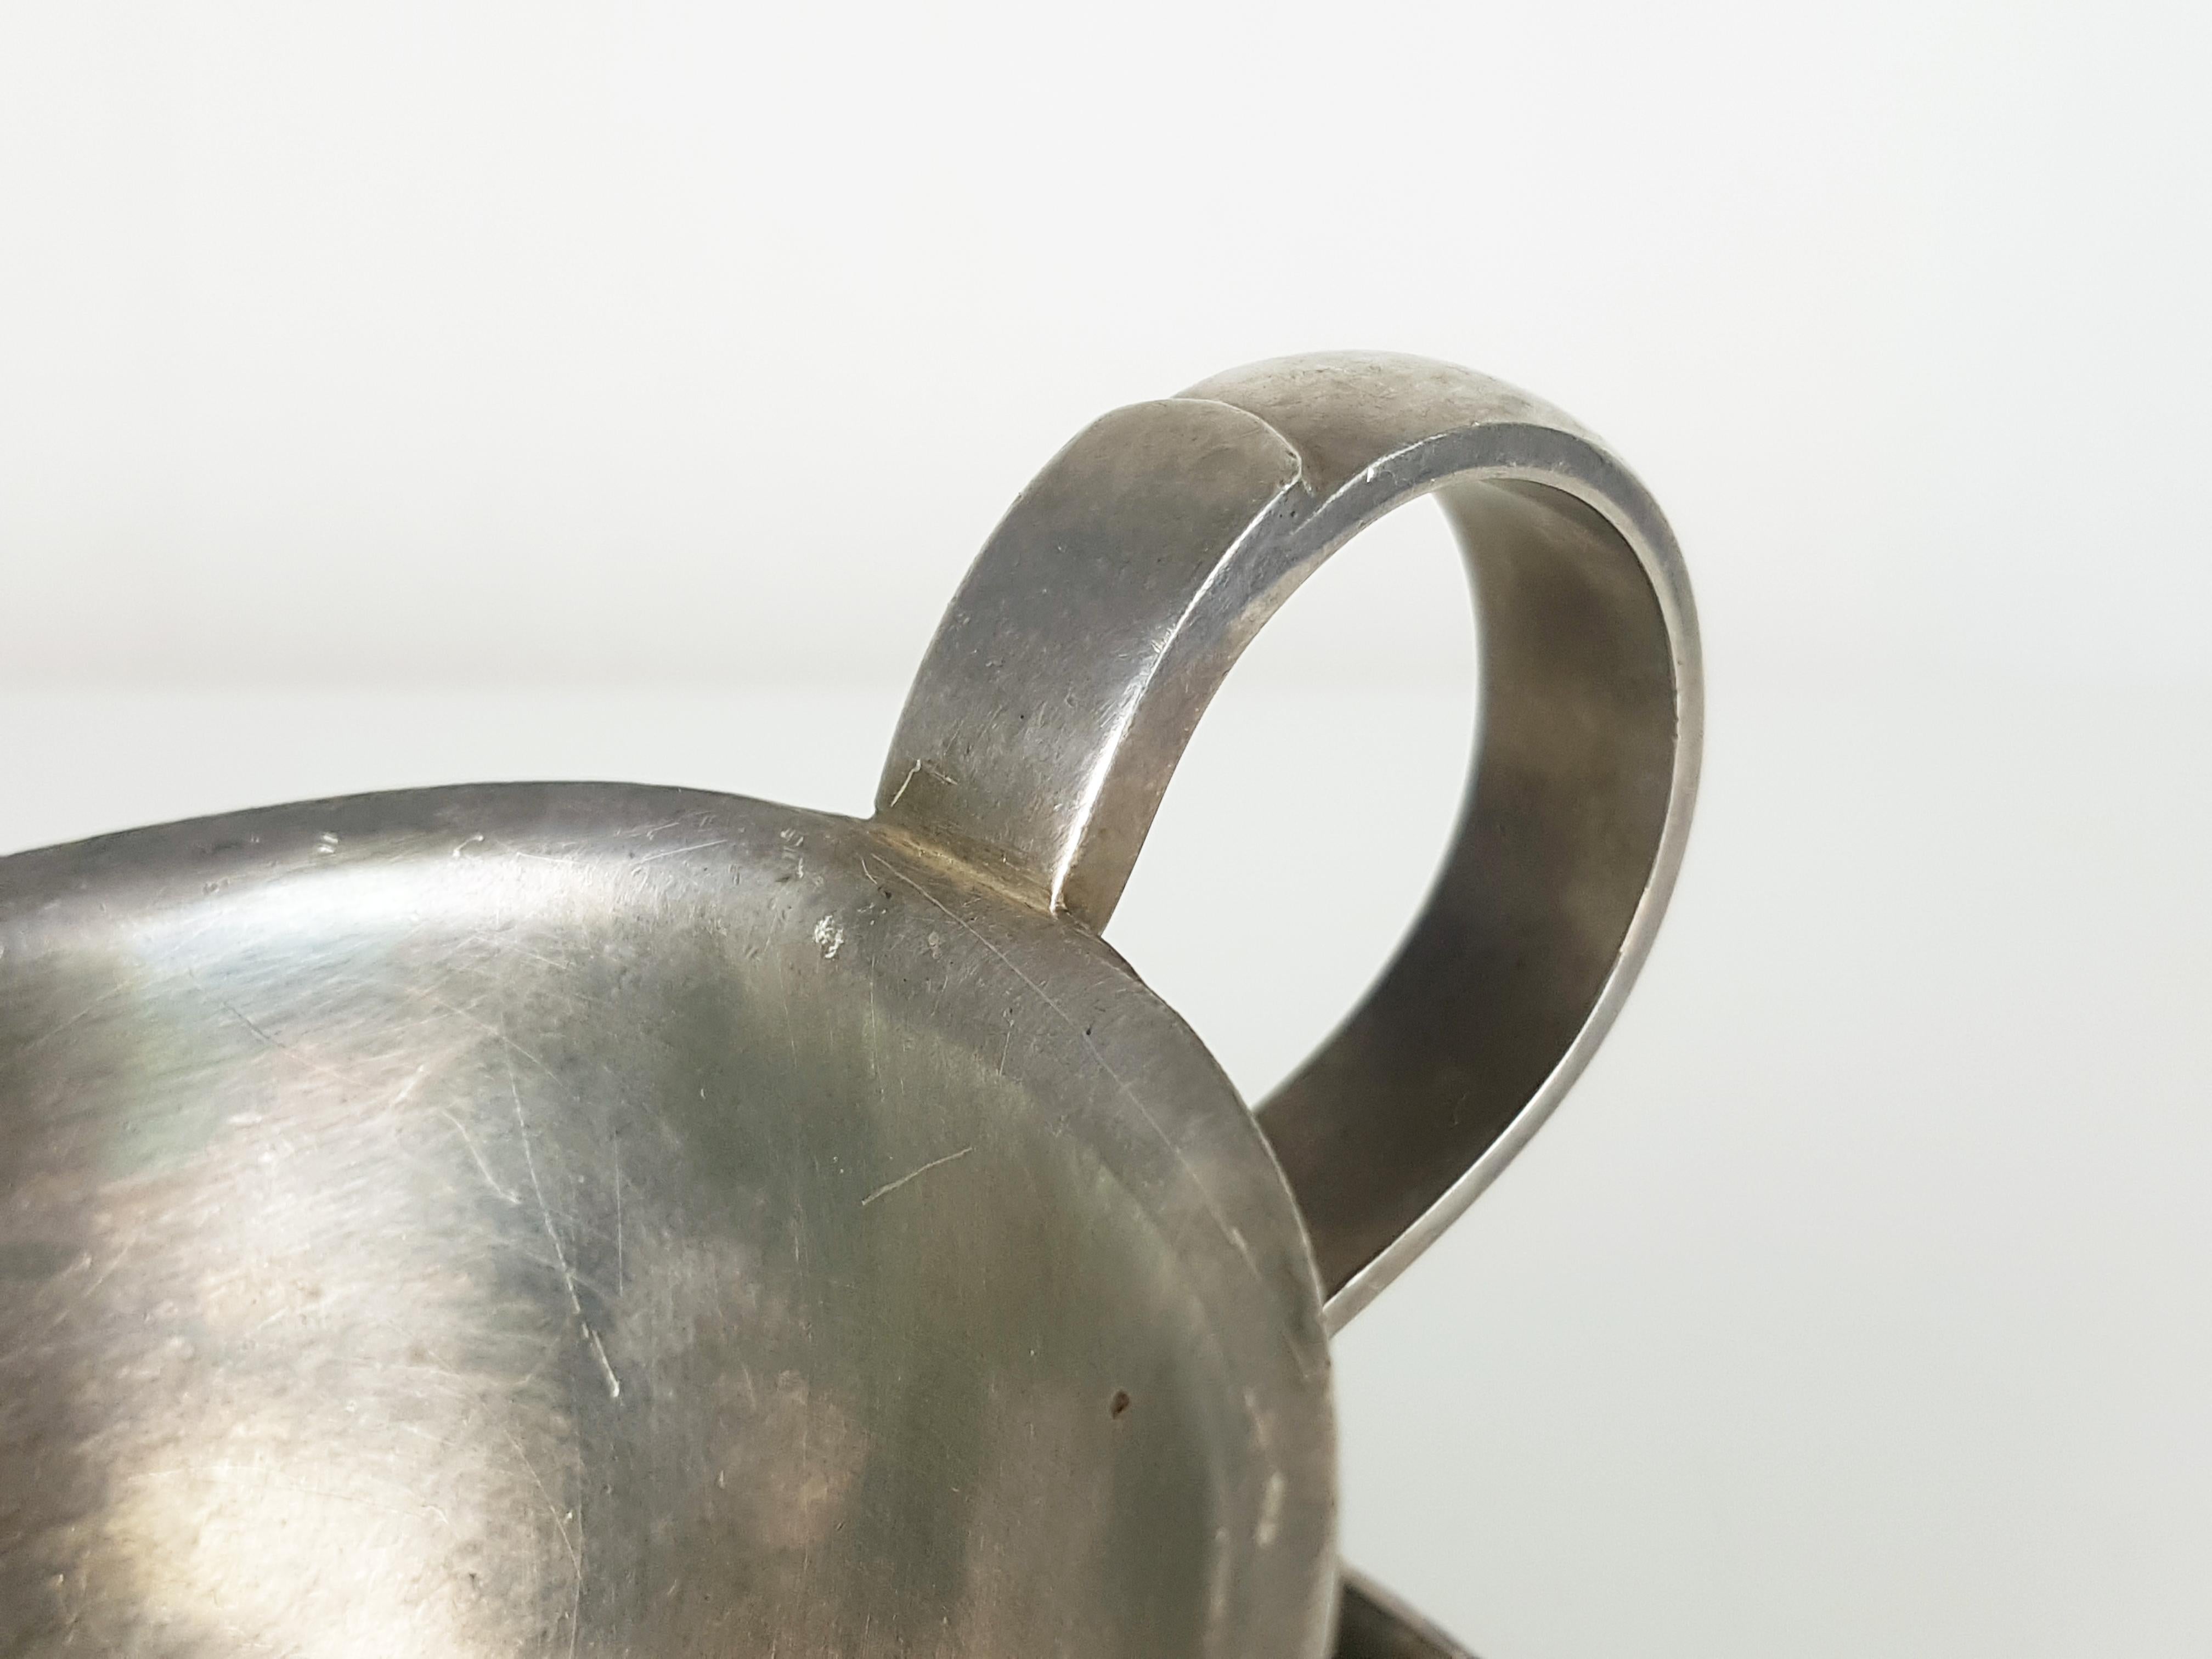 Italian Silver-Plated milk jug and gravy boat by Gio Ponti for Calderoni, 1930s For Sale